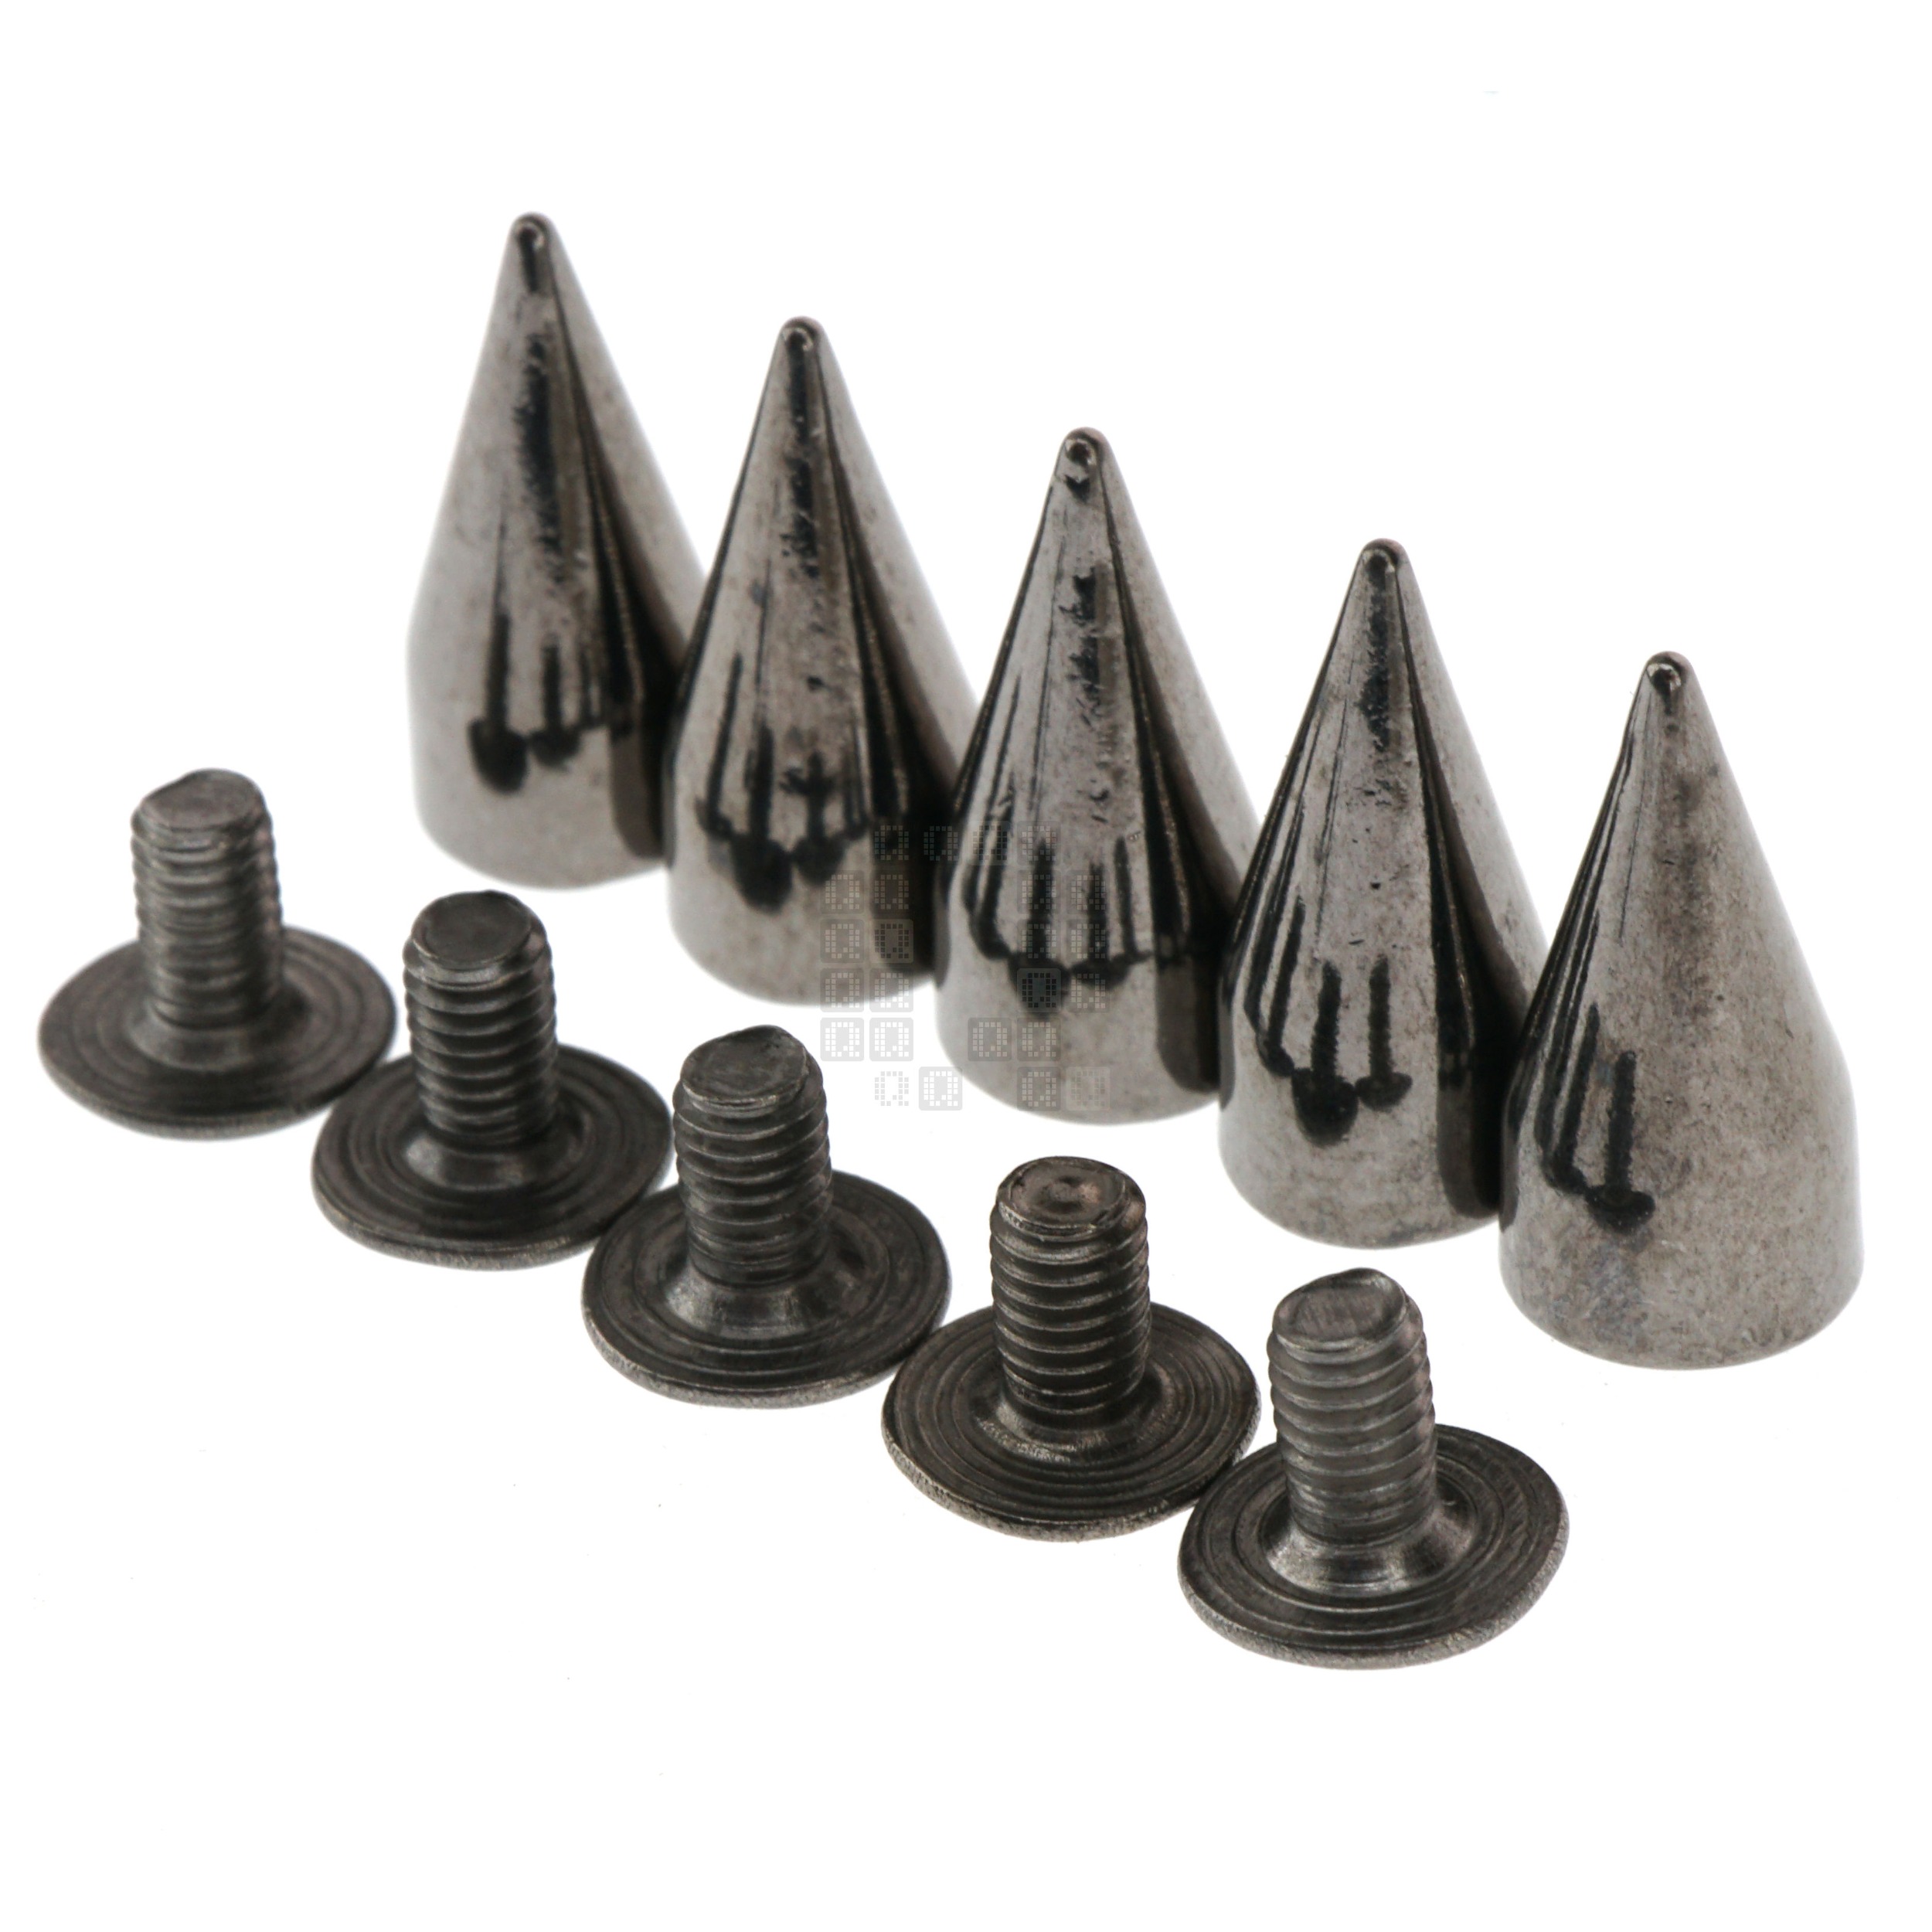 Gunmetal Conical Spike with Screw, 7x14mm, M3-0.5mm Threaded, 5 Pack